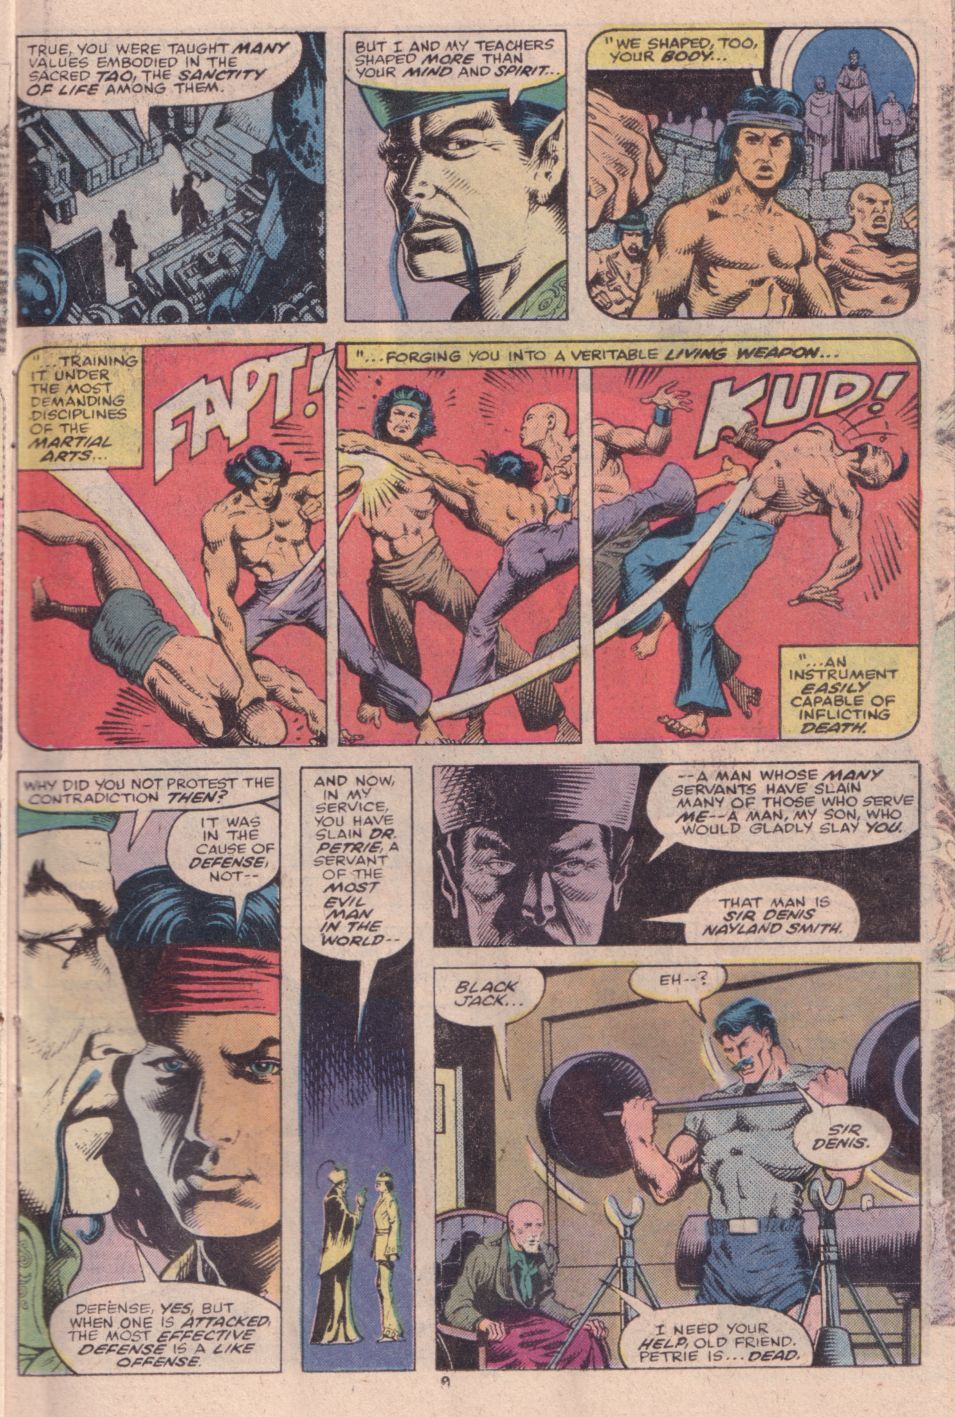 What If? (1977) issue 16 - Shang Chi Master of Kung Fu fought on The side of Fu Manchu - Page 8